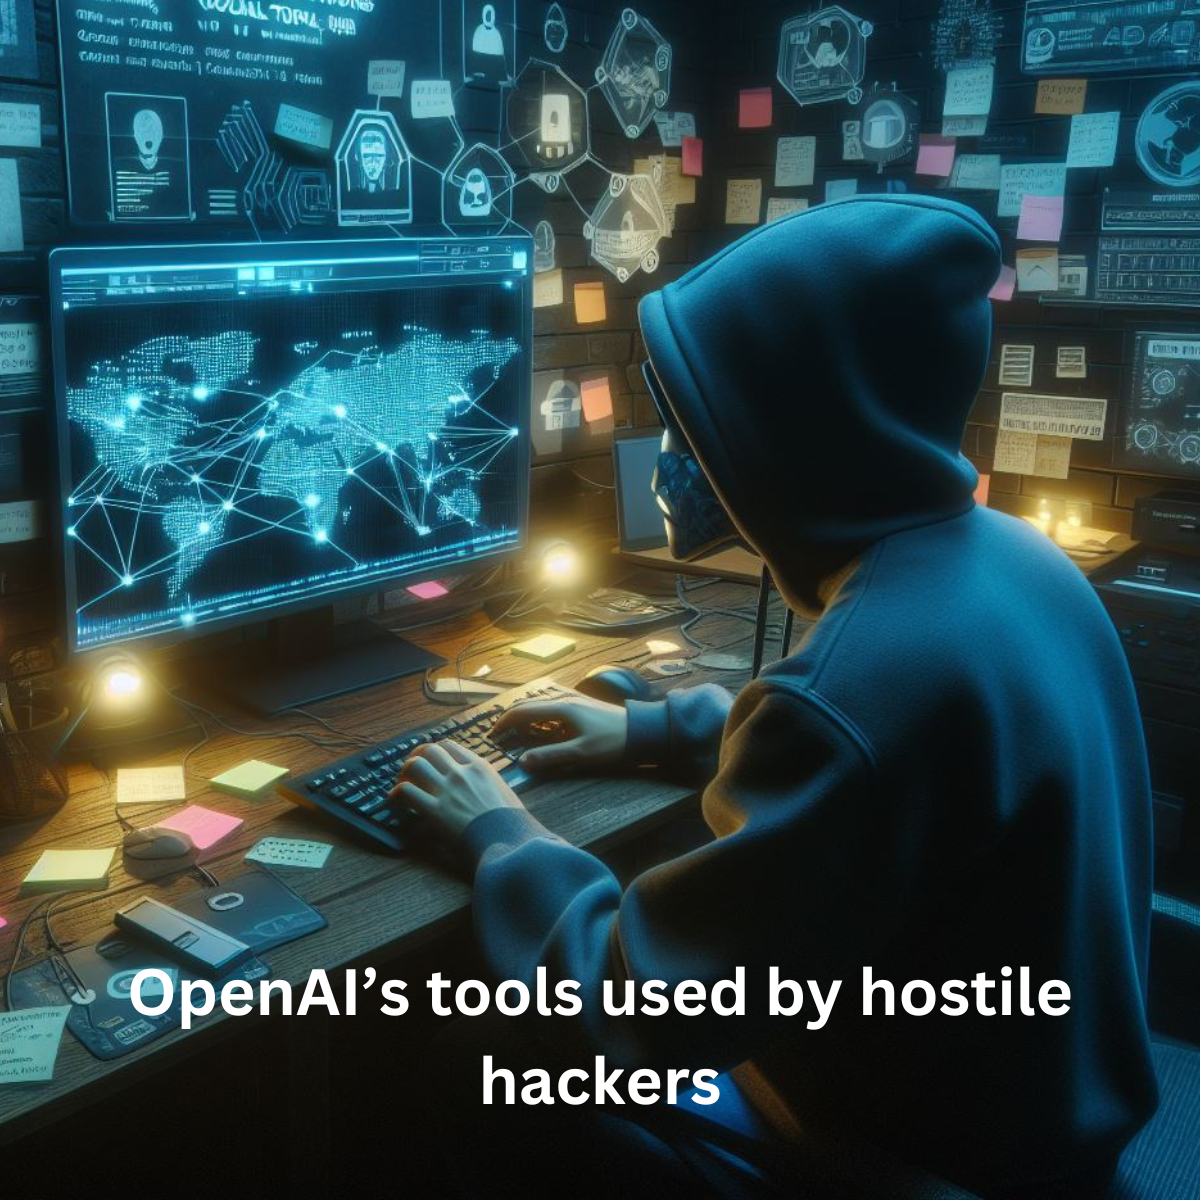 OpenAI’s tools used by hostile hackers